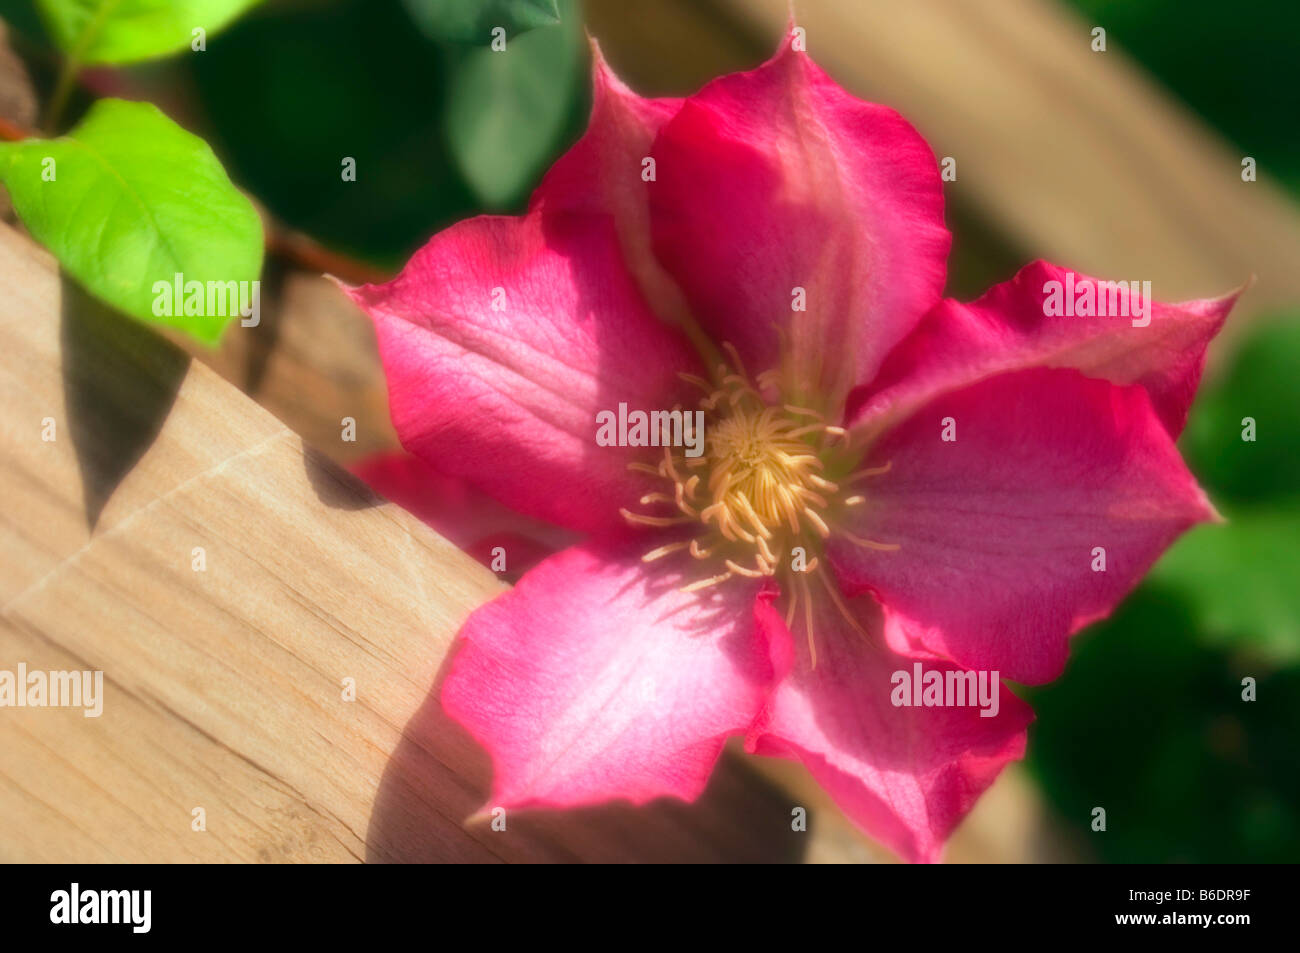 Clematis flower, close up Stock Photo